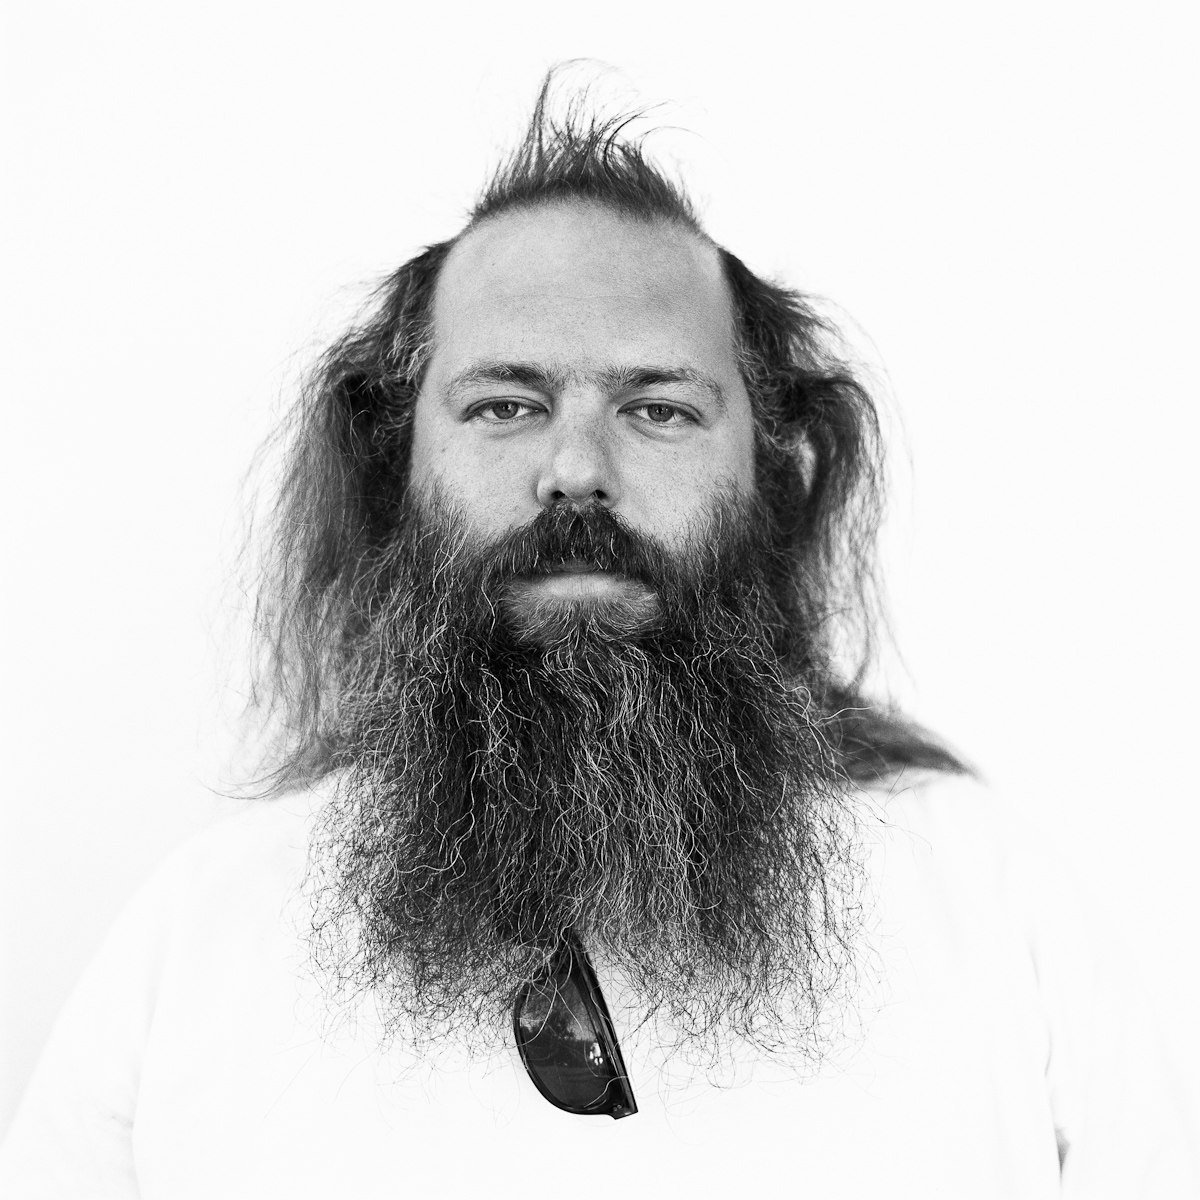 5 Lessons Rick Rubin Can Teach Us About Leadership